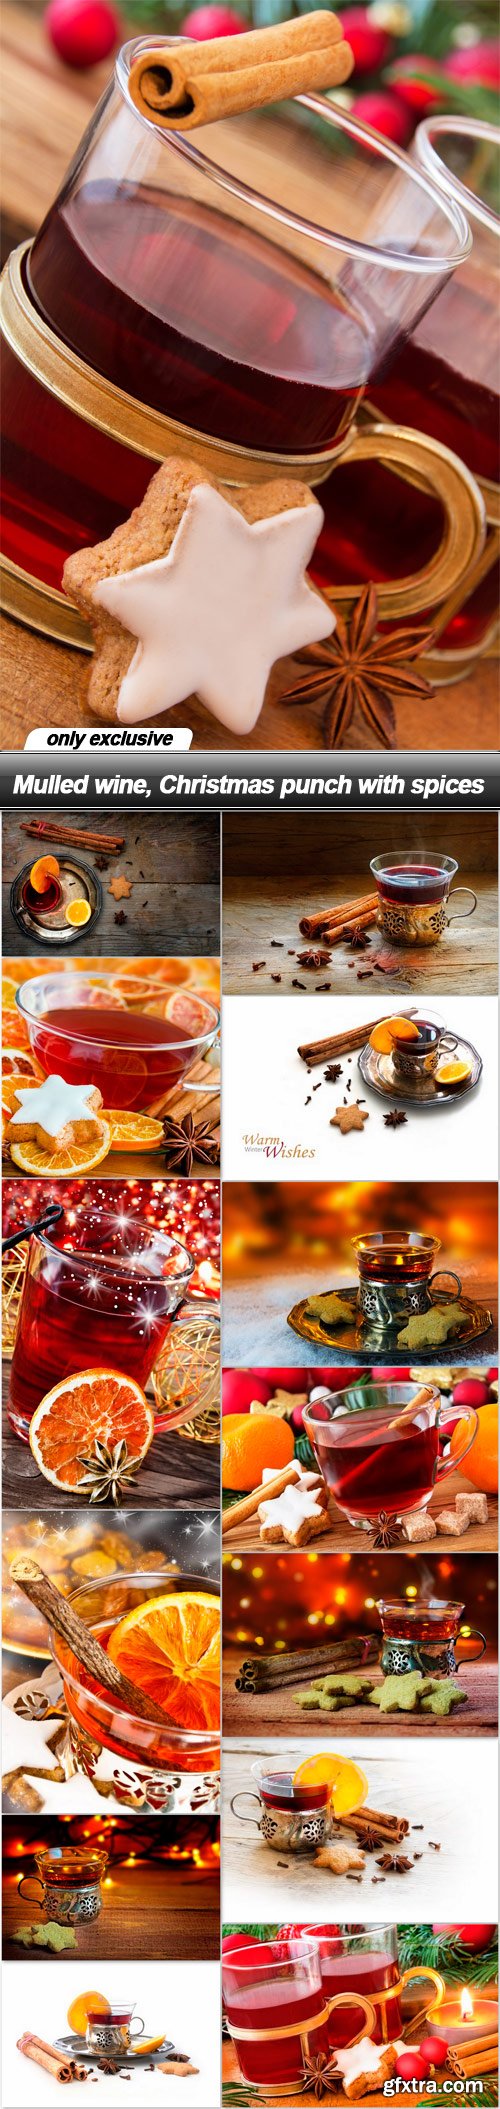 Mulled wine, Christmas punch with spices - 14 UHQ JPEG